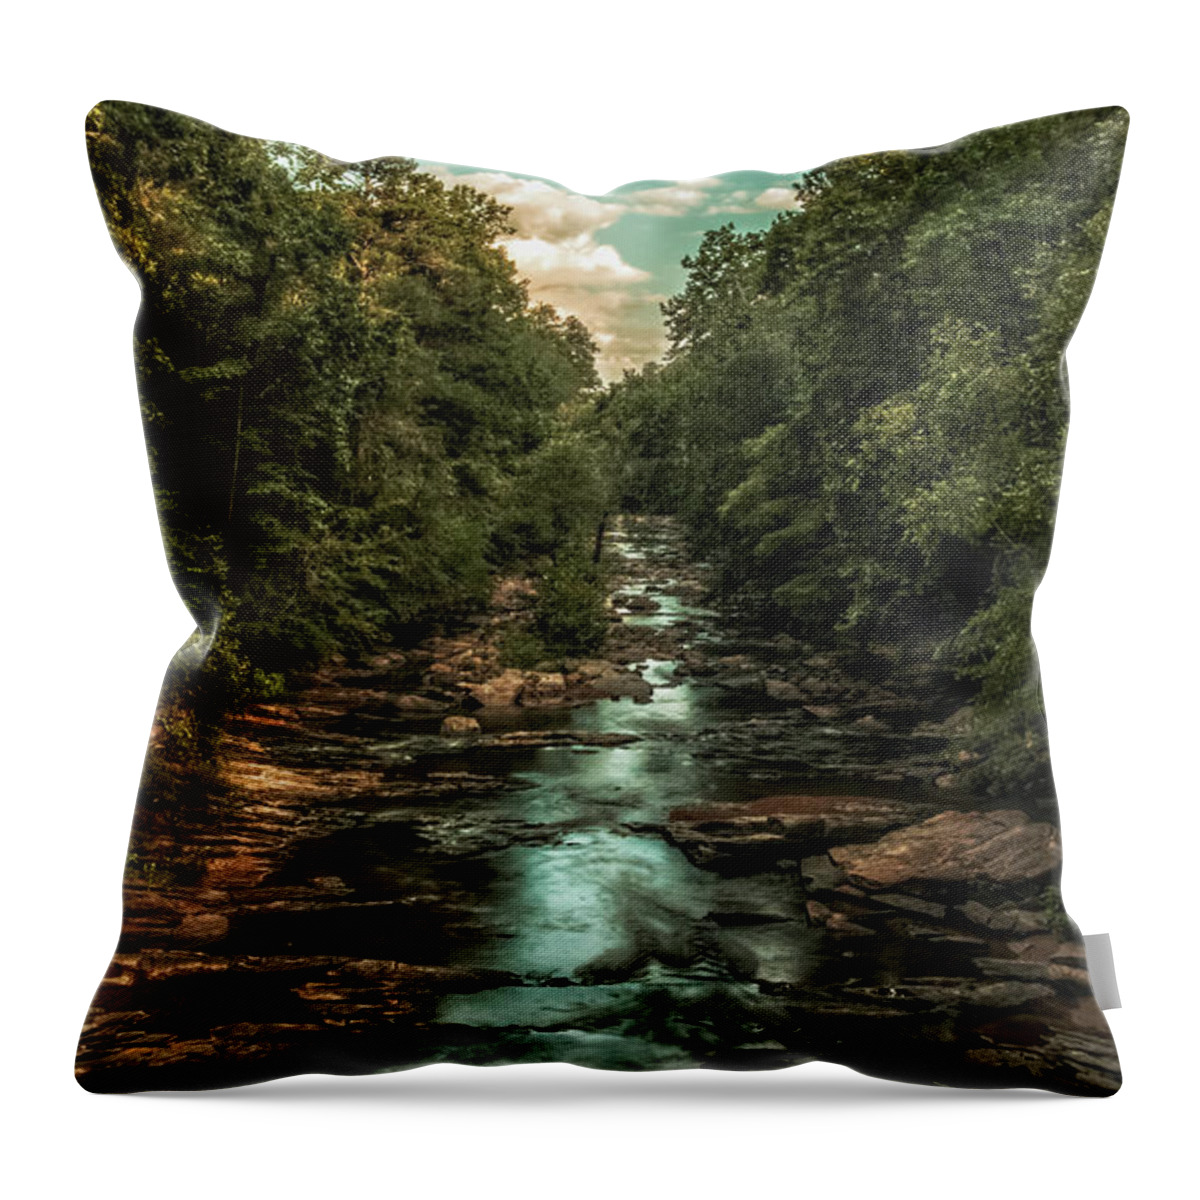 Water Throw Pillow featuring the photograph The Jungle by Mike Dunn